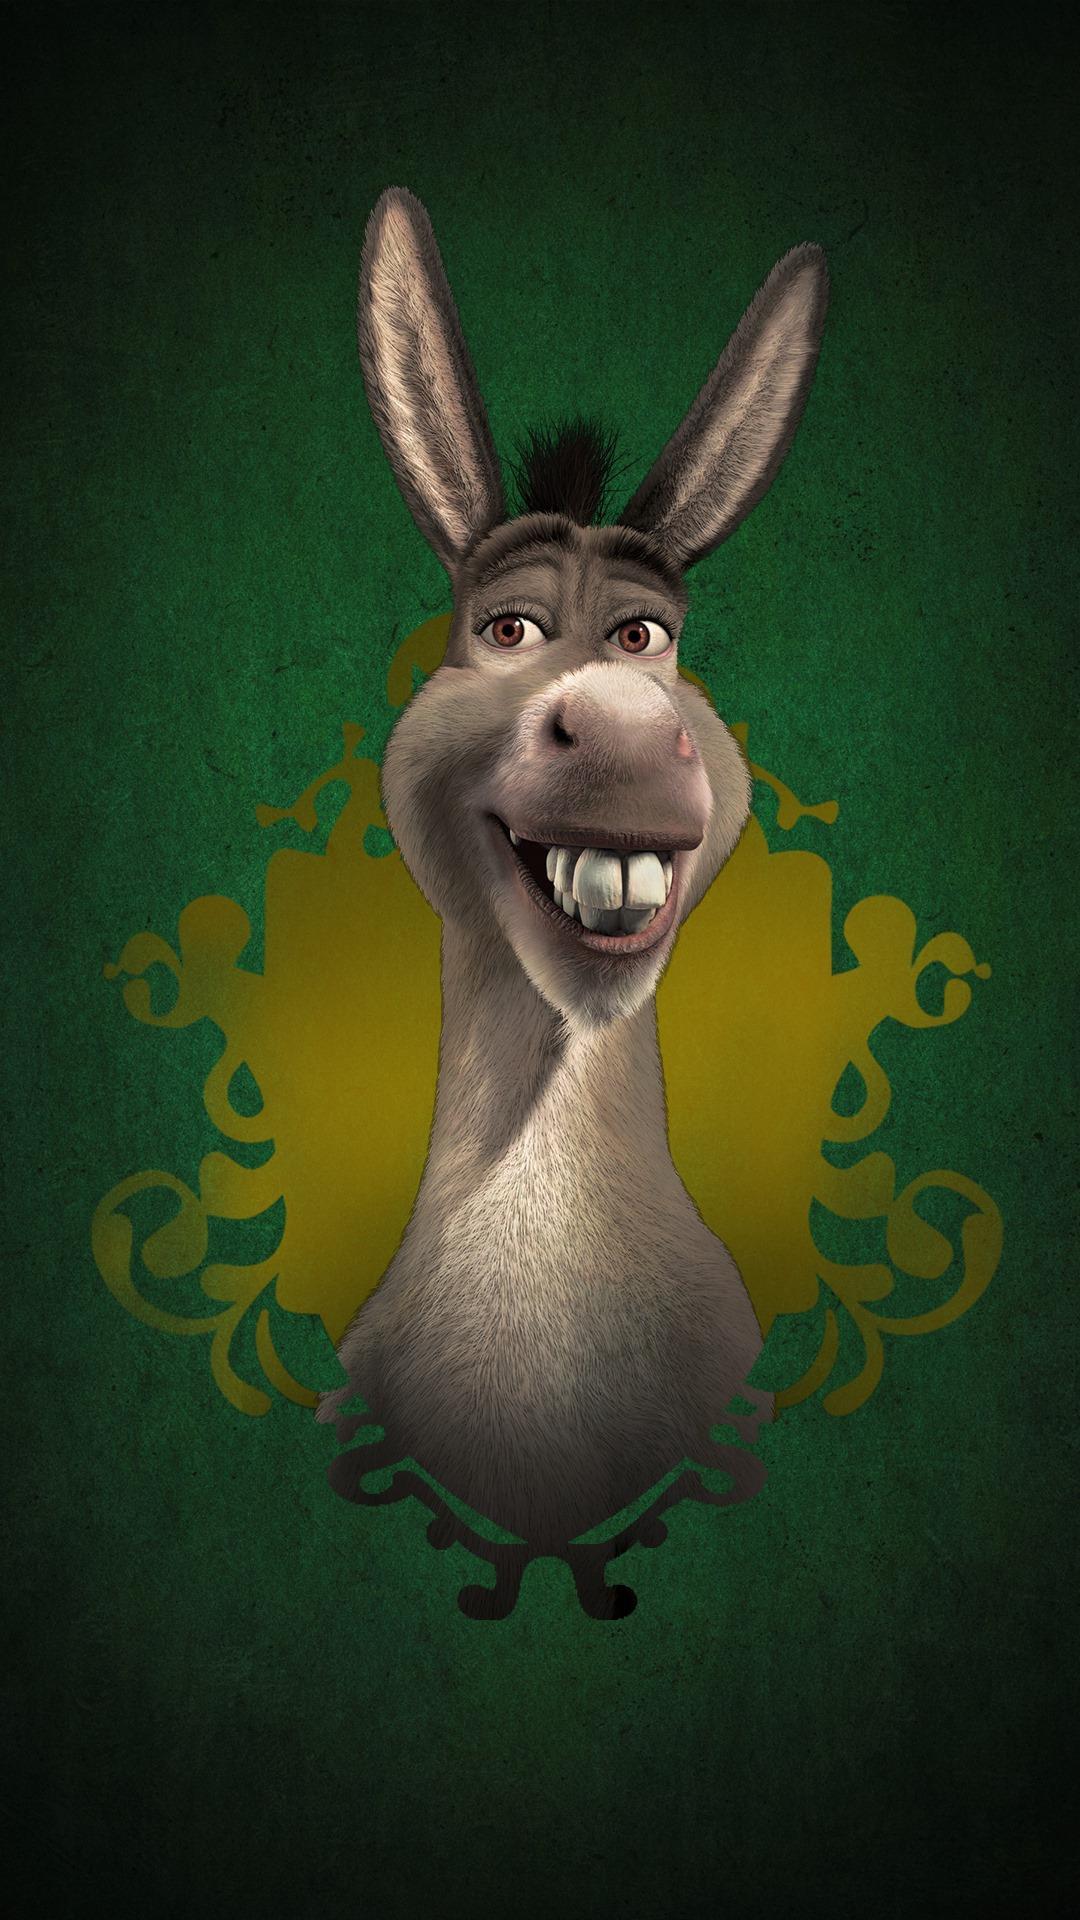 Shrek And Donkey Wallpapers Top Free Shrek And Donkey Backgrounds